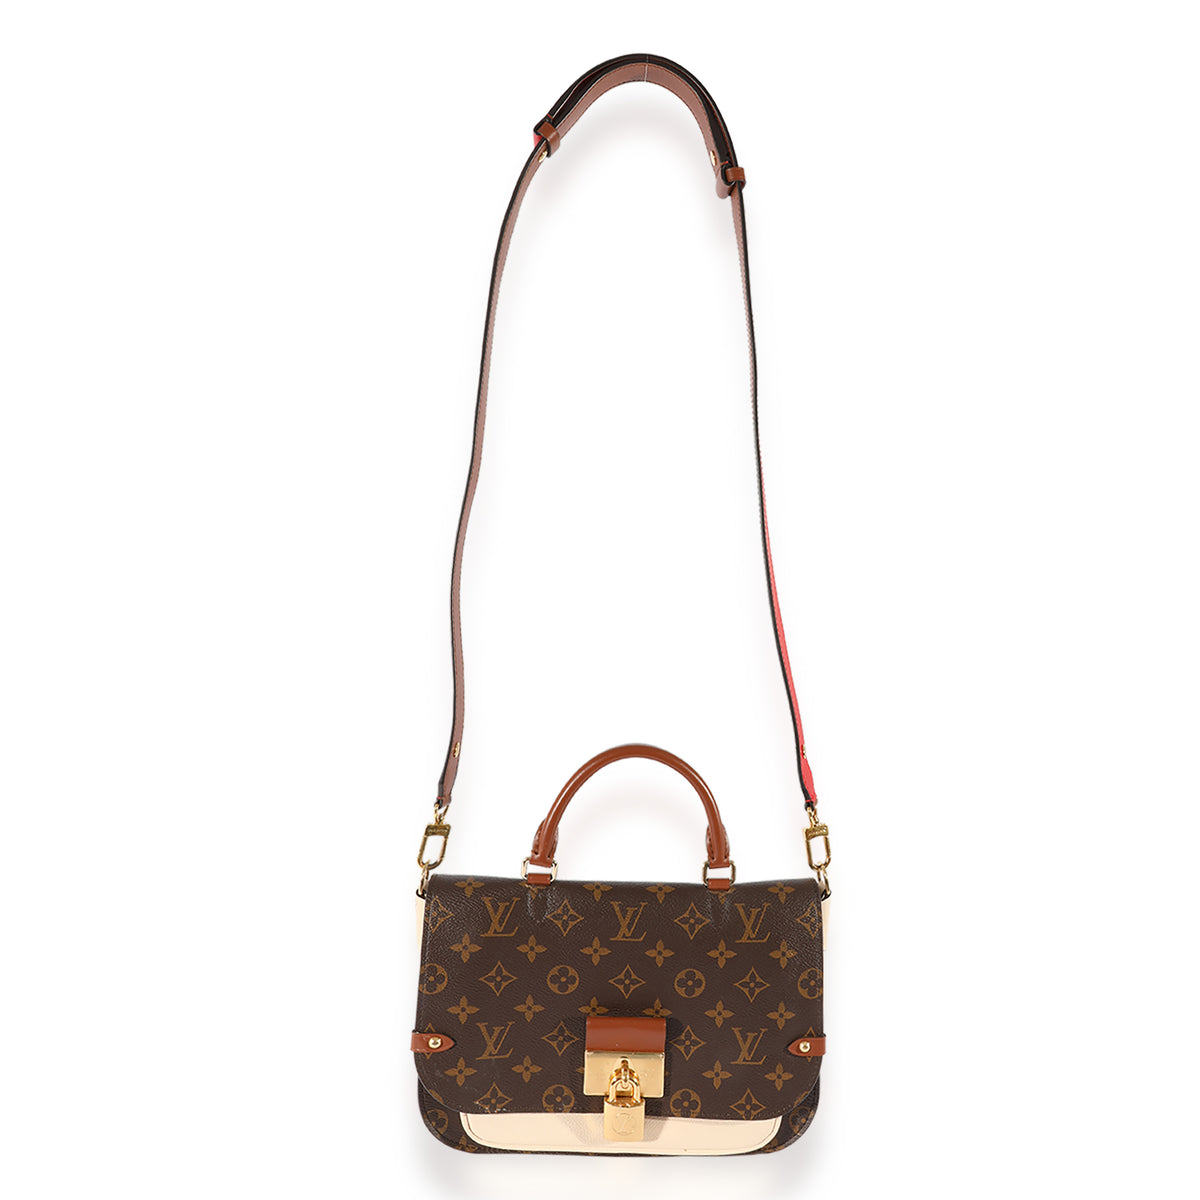 Louis Vuitton - Authenticated Vaugirard Handbag - Leather Brown for Women, Very Good Condition